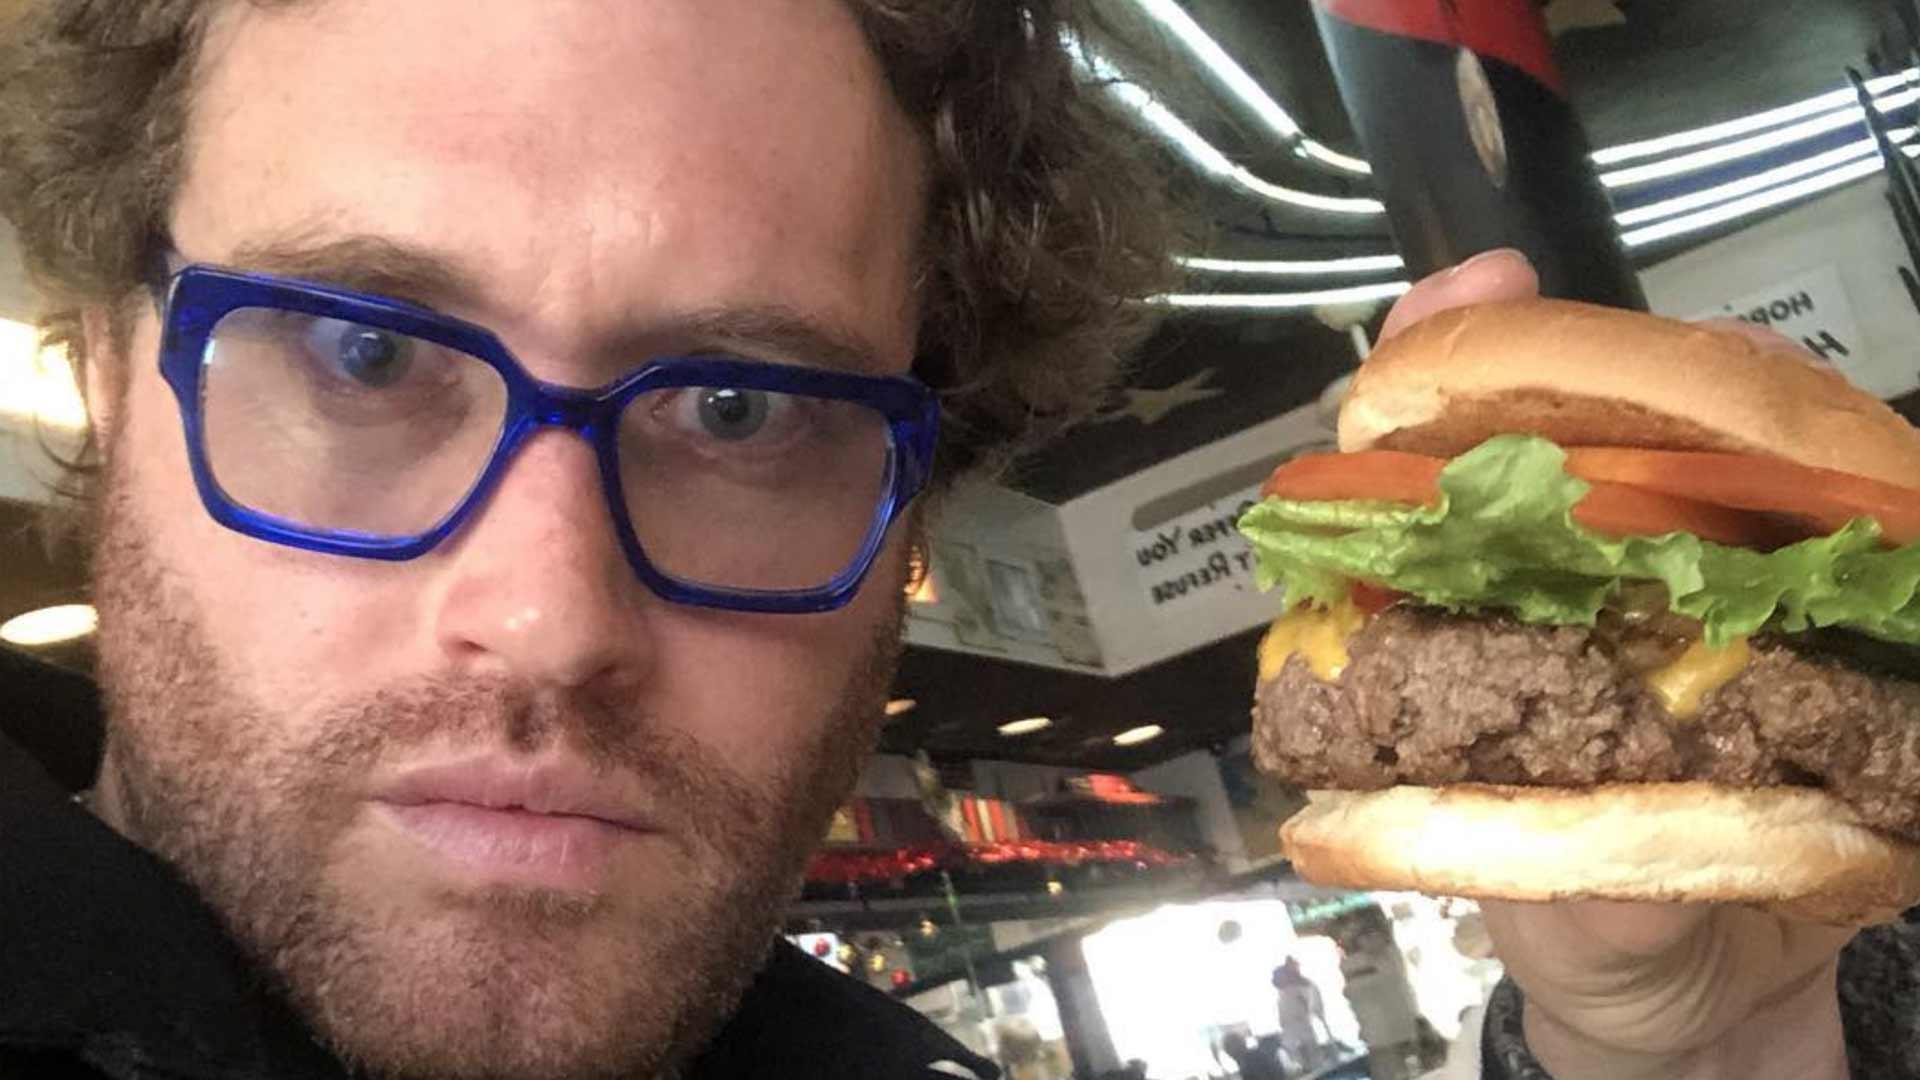 ‘Deadpool’ Star T.J. Miller Fears People Will Illegally Use His Signature, Prosecutors Seal Docs in Bomb Threat Case